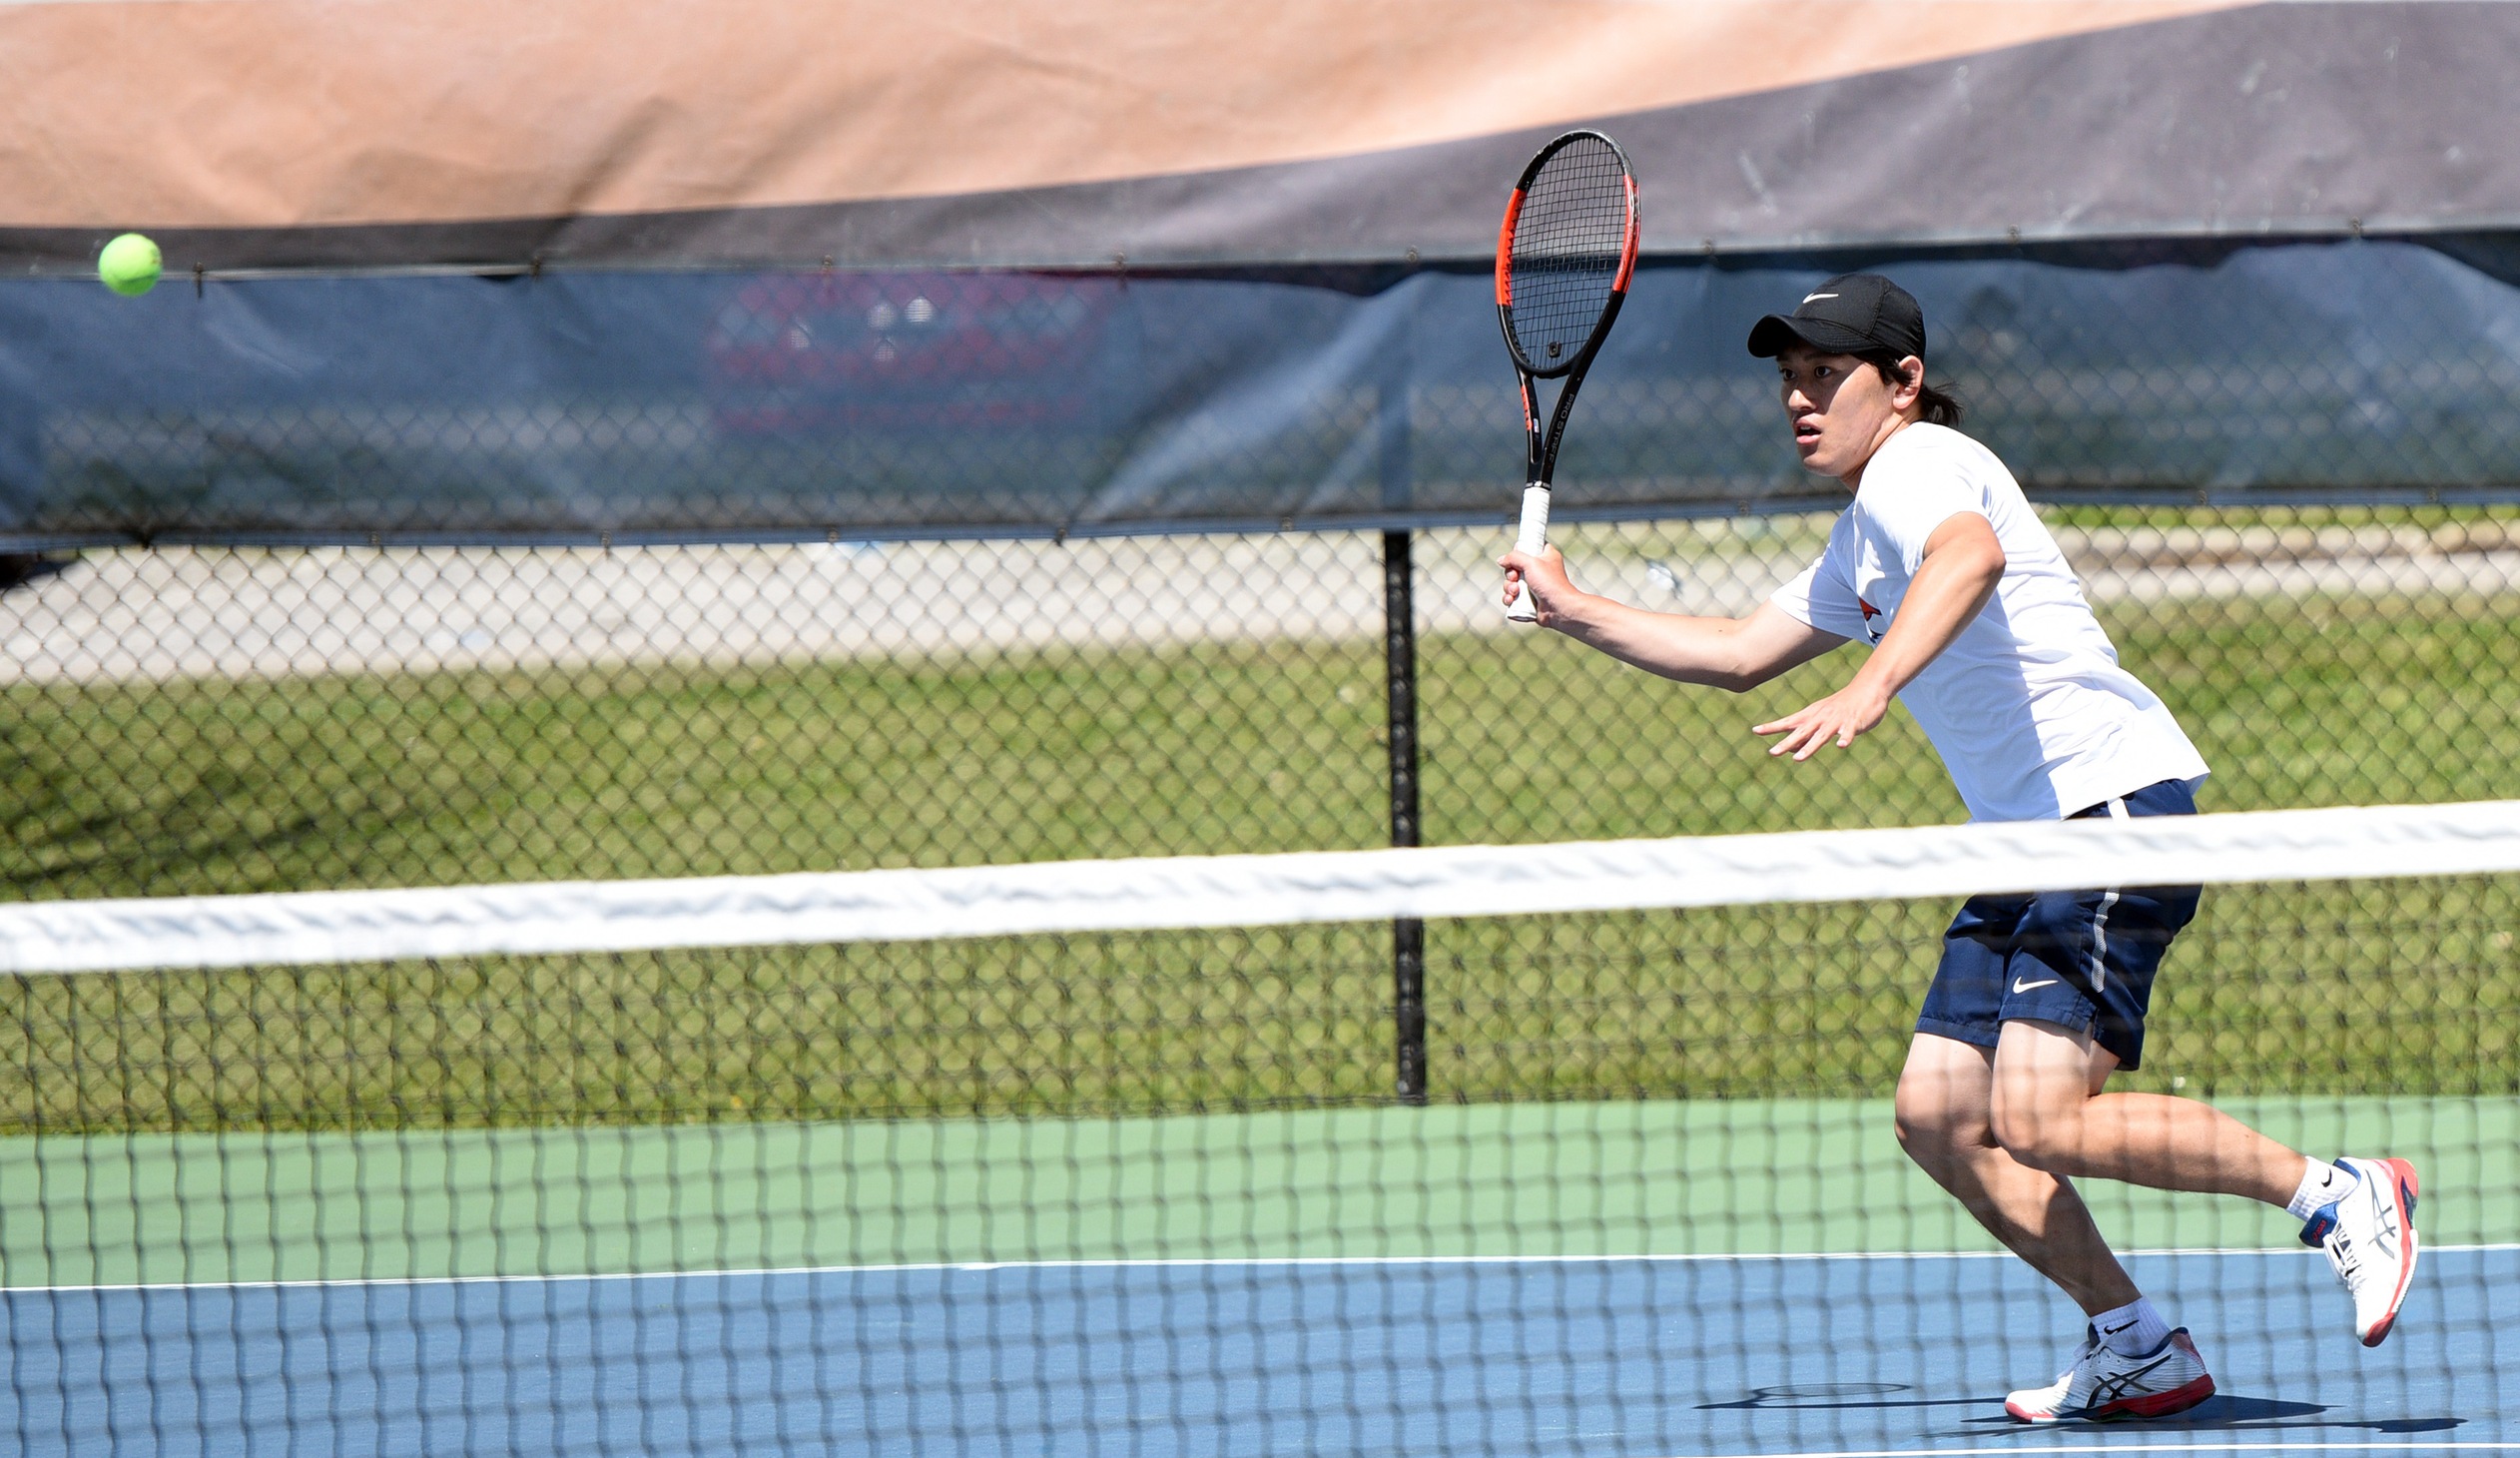 Eagles saunter to Sumter for ITA Southeast Regional Qualifiers